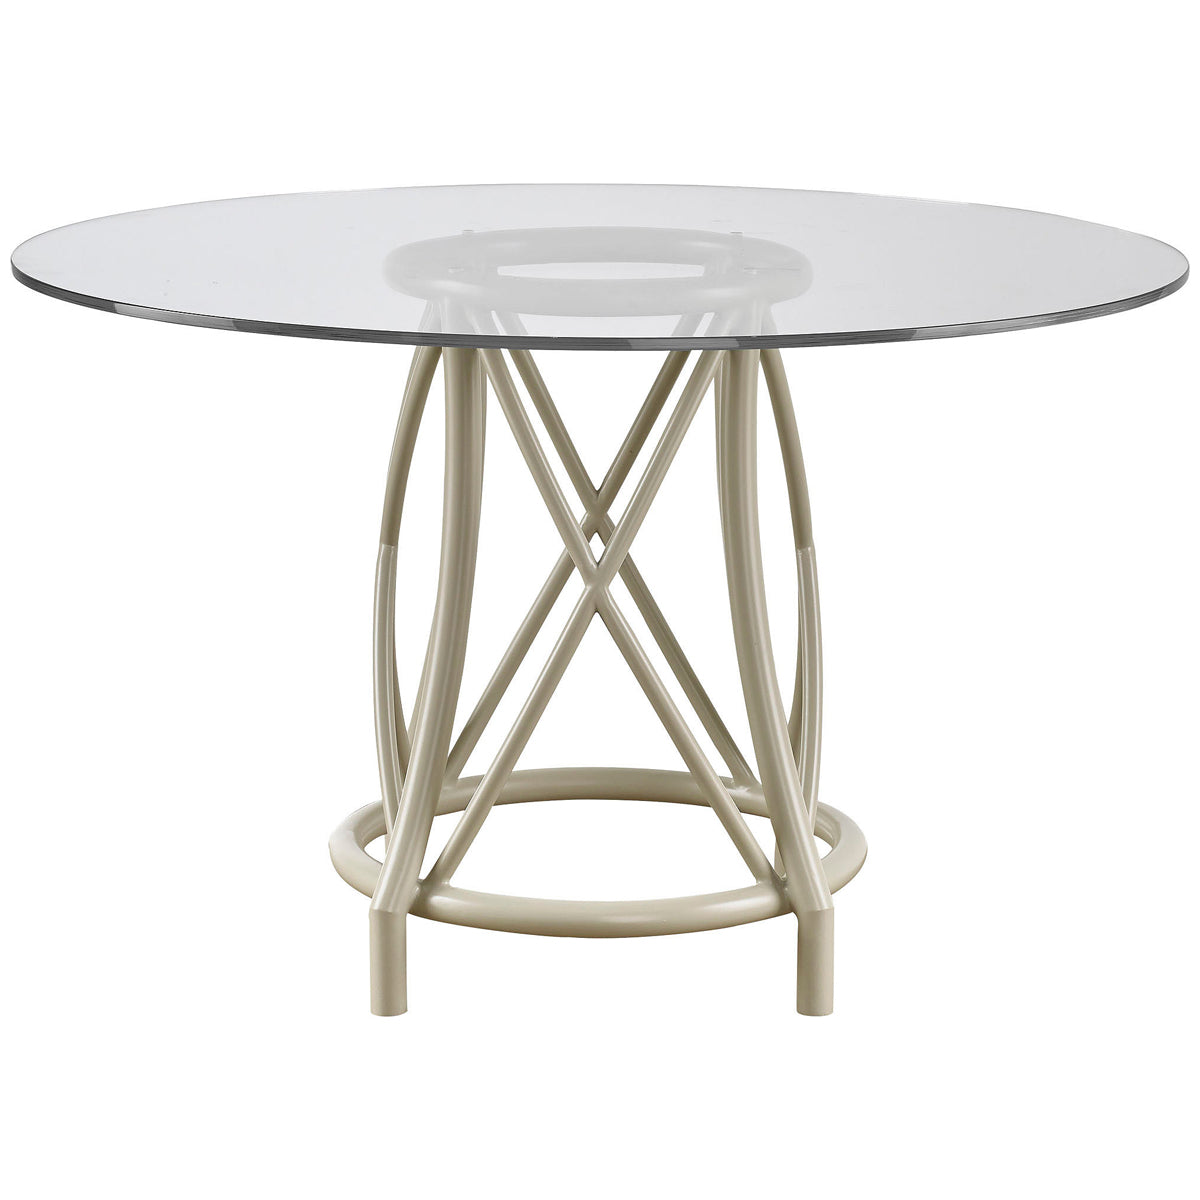 Baker Furniture Gondola Outdoor 48-Inch Round Dining Table MCO3034